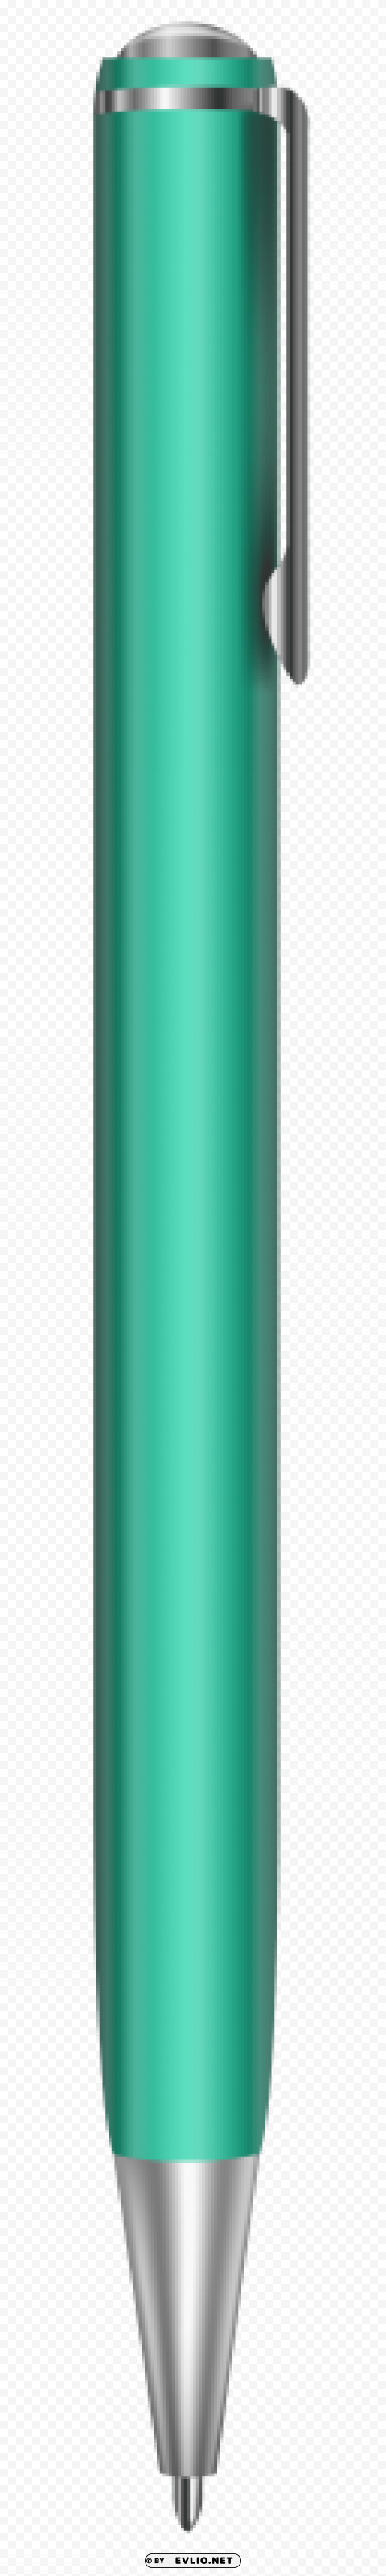 pen Isolated Item on Clear Transparent PNG